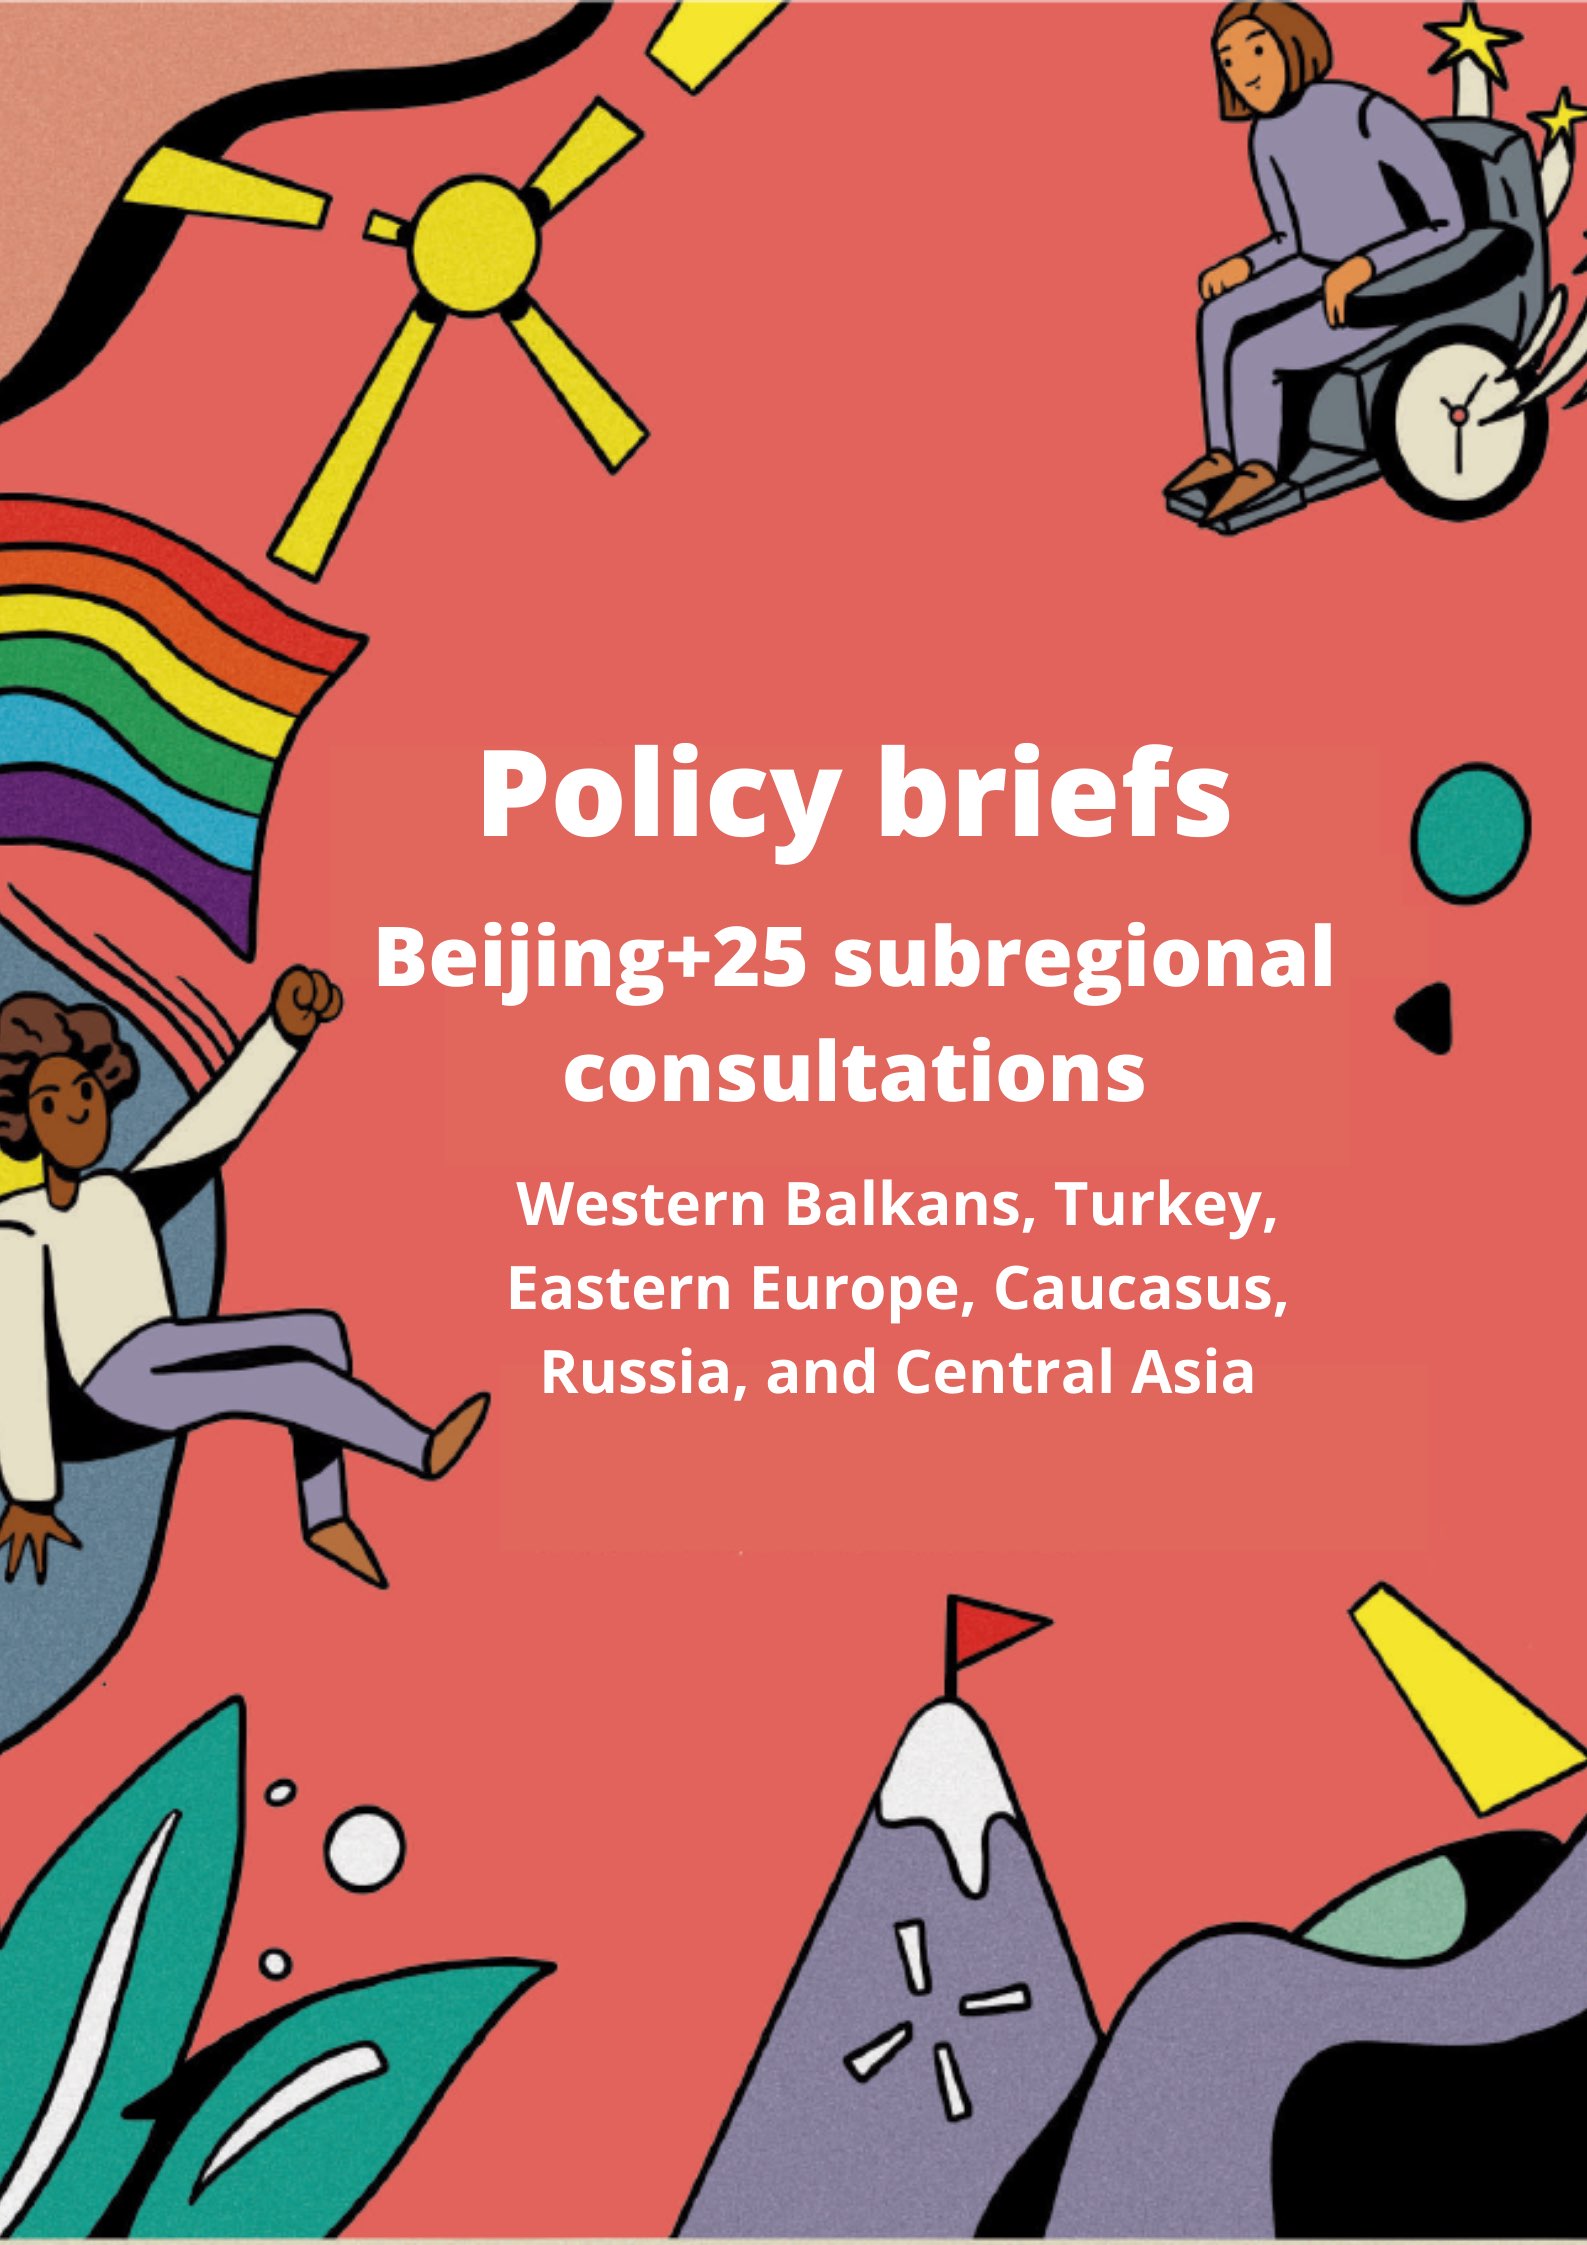 Policy brief cover with subregions in title